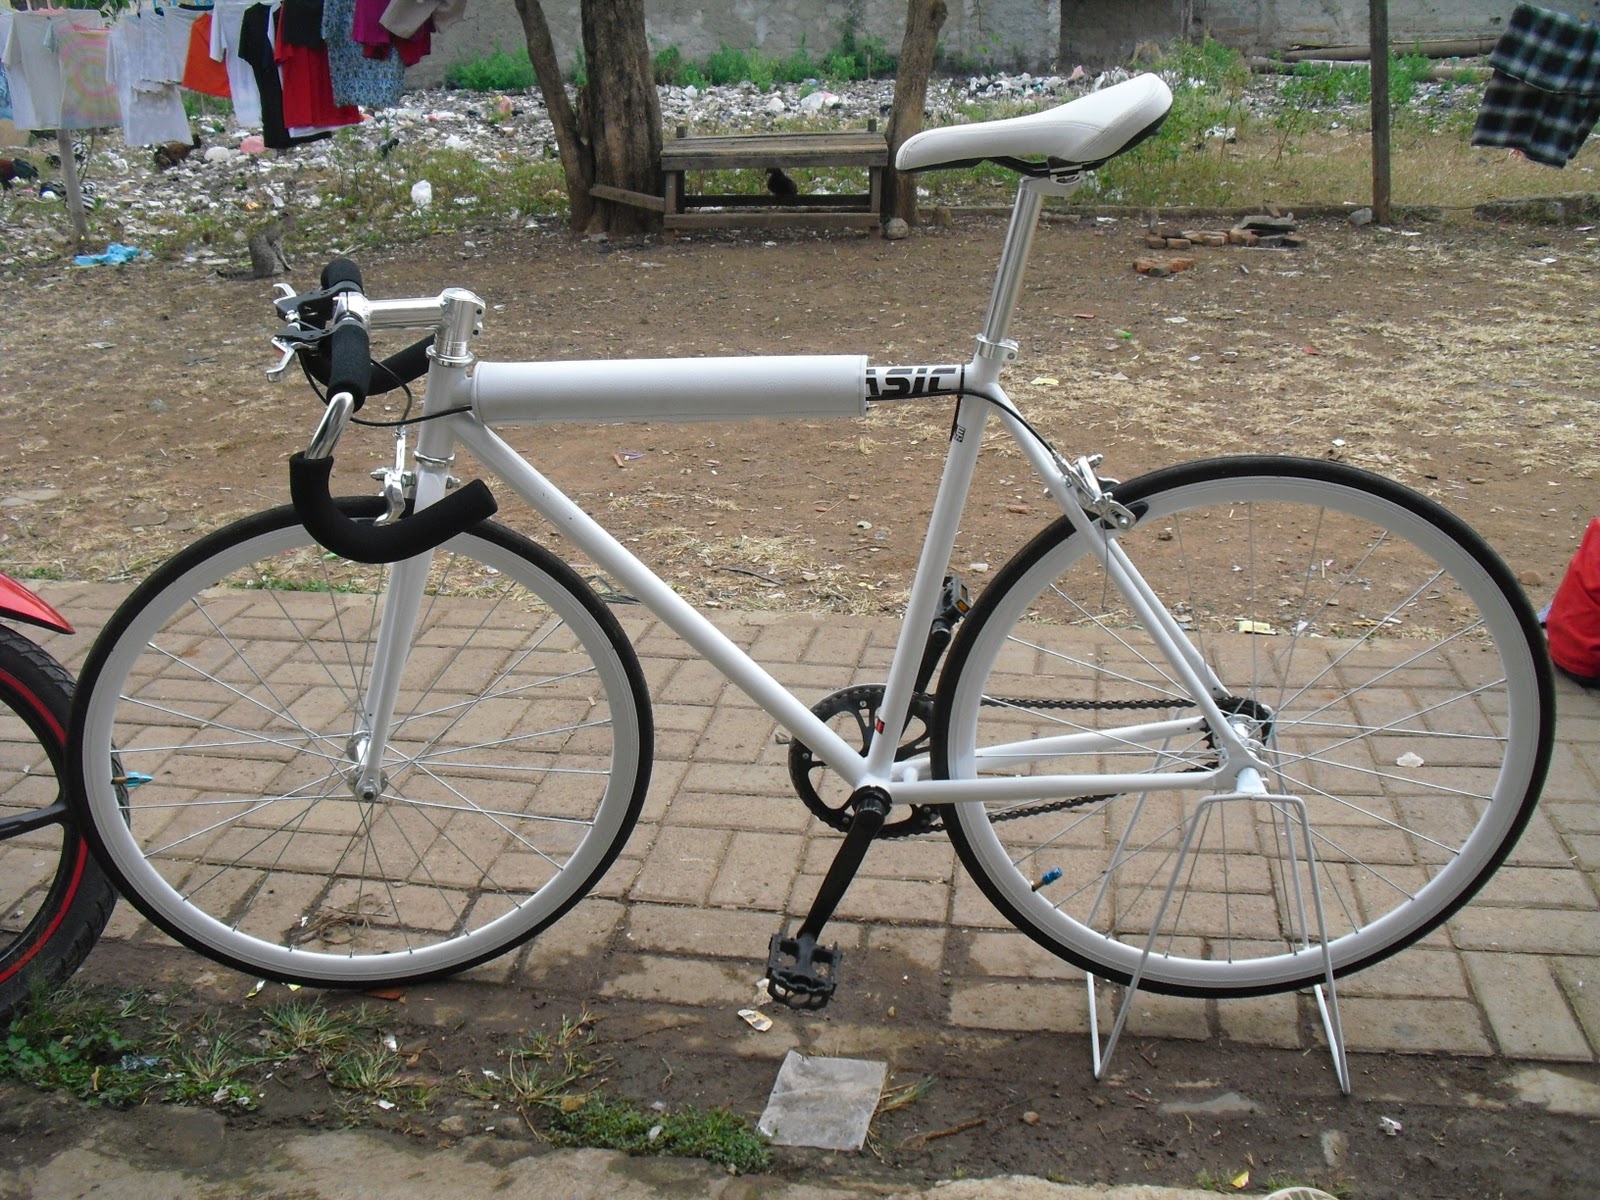 Di jual Sepeda Fixie . | Anything, Everything, It's ...